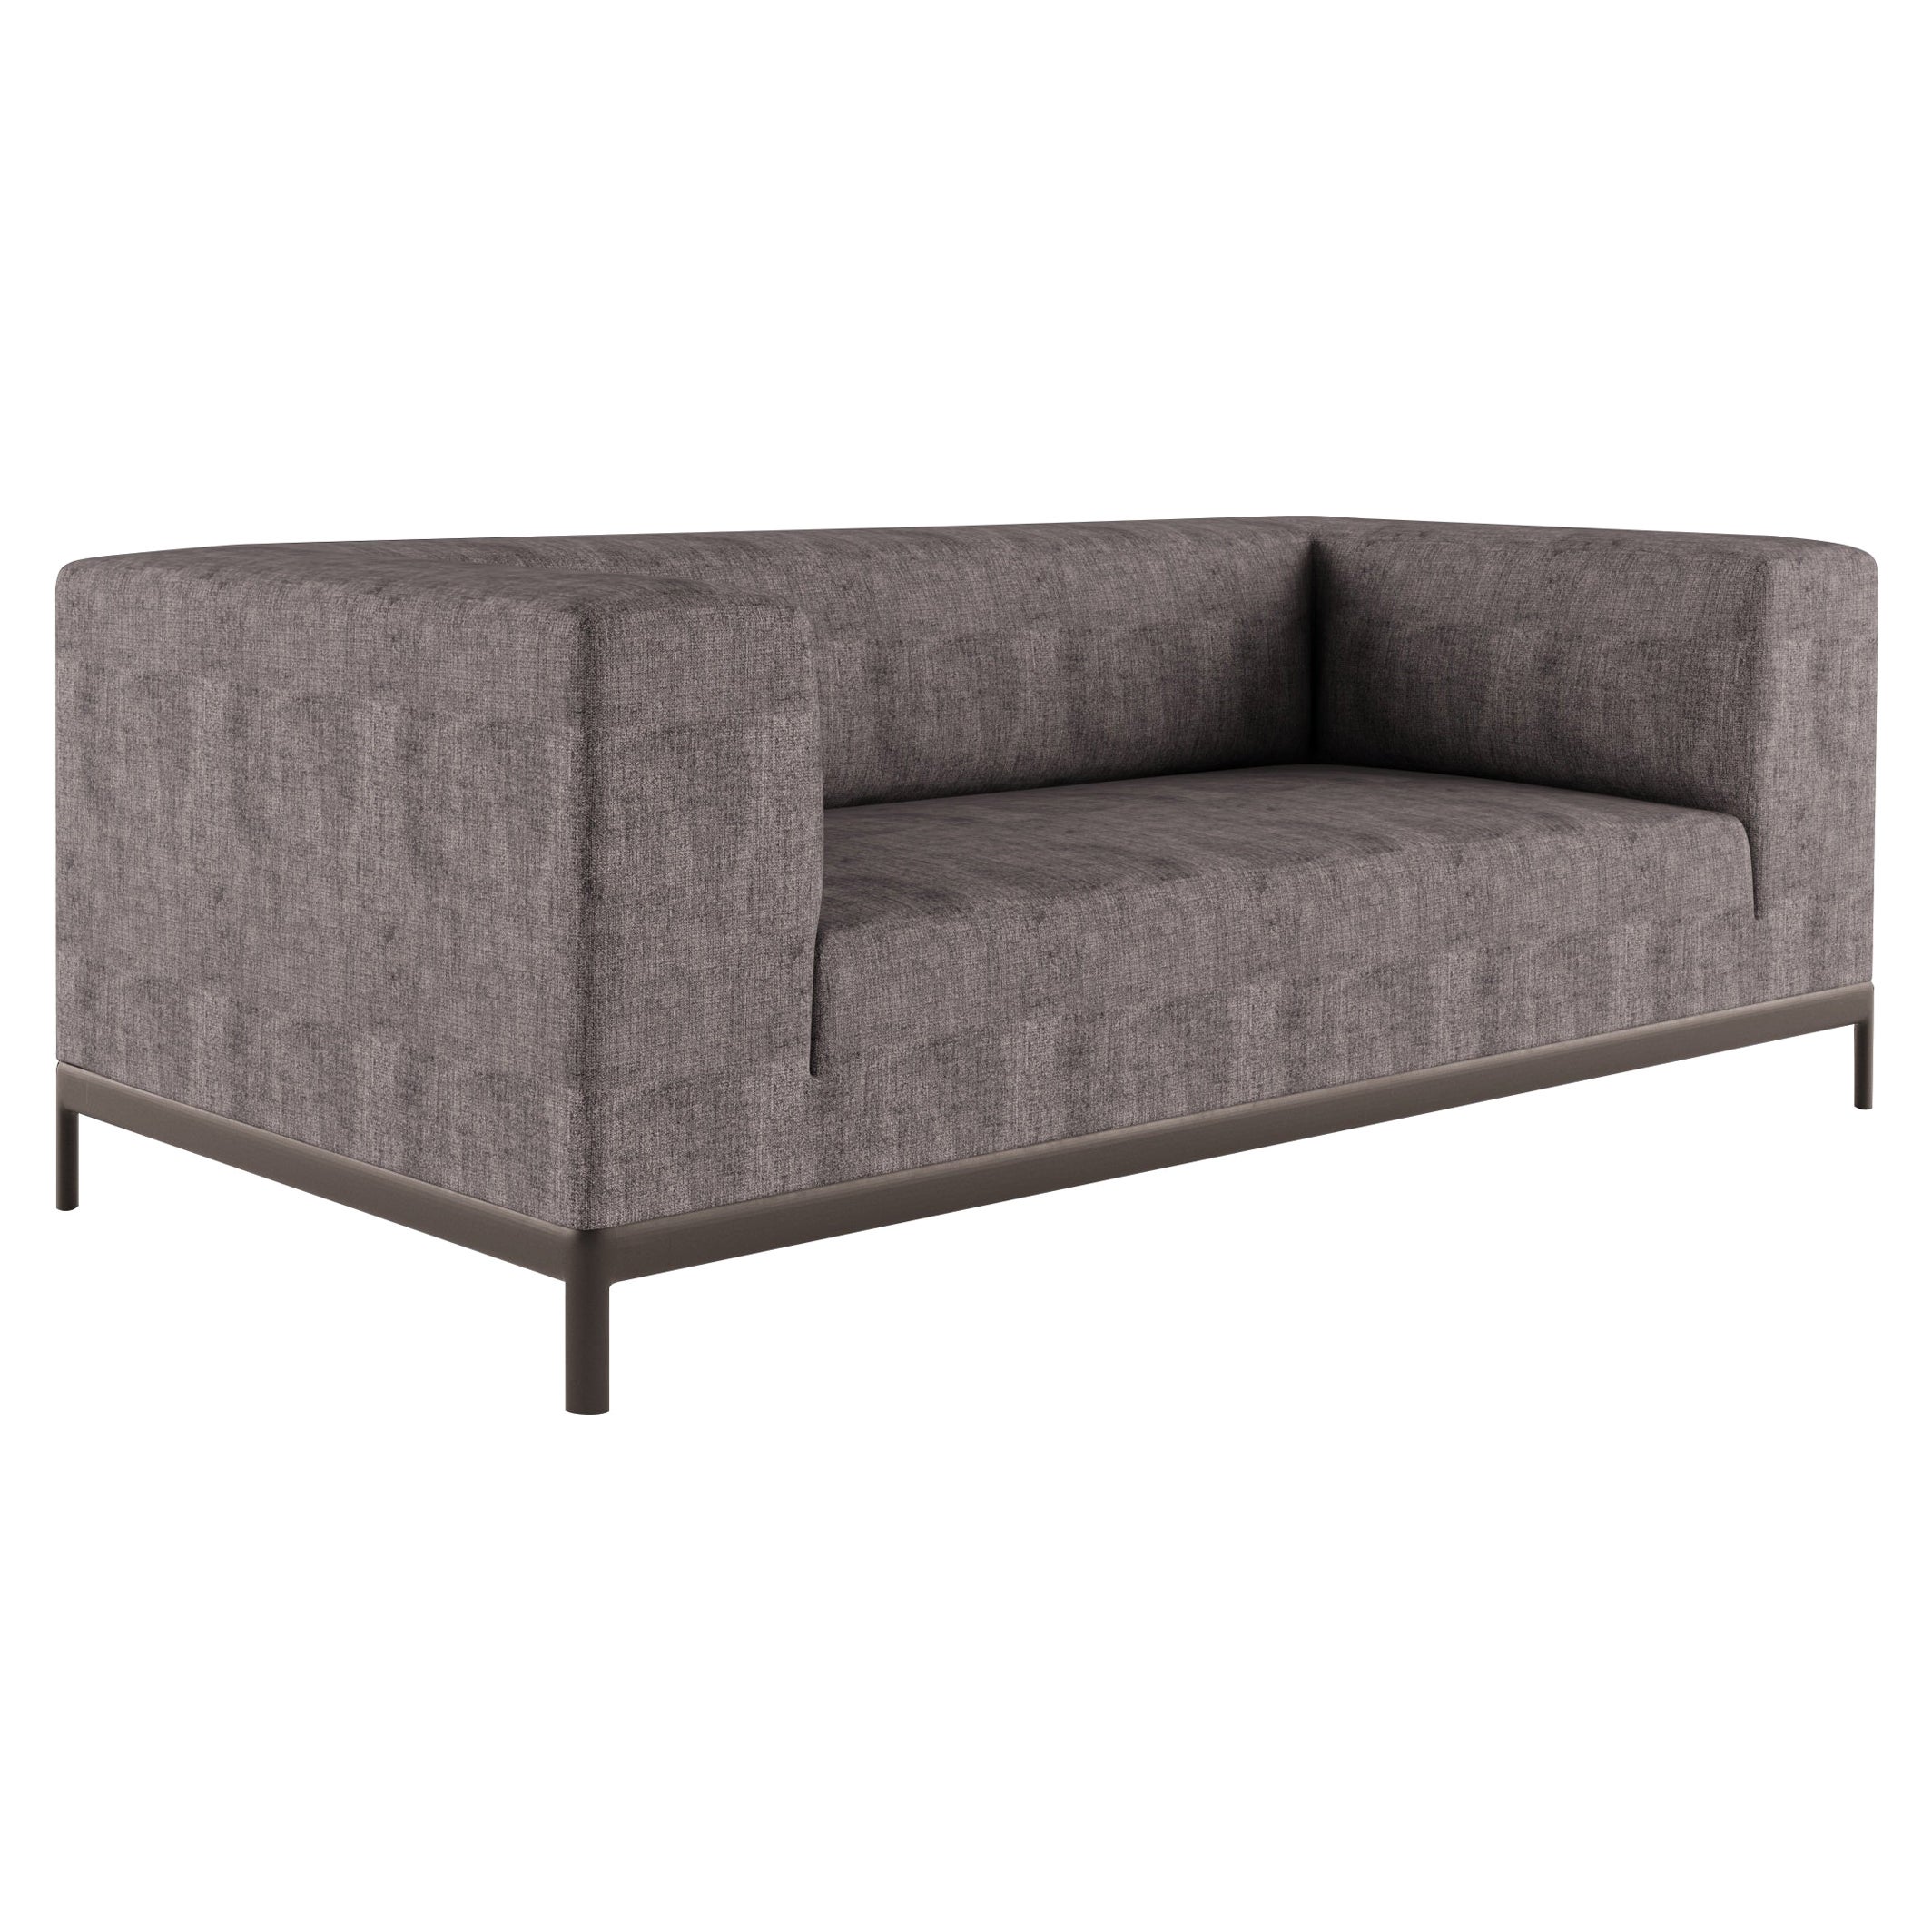 Alias P32 AluZen Soft Sofa 2 Seater with Upholstery and Lacquered Aluminum Frame